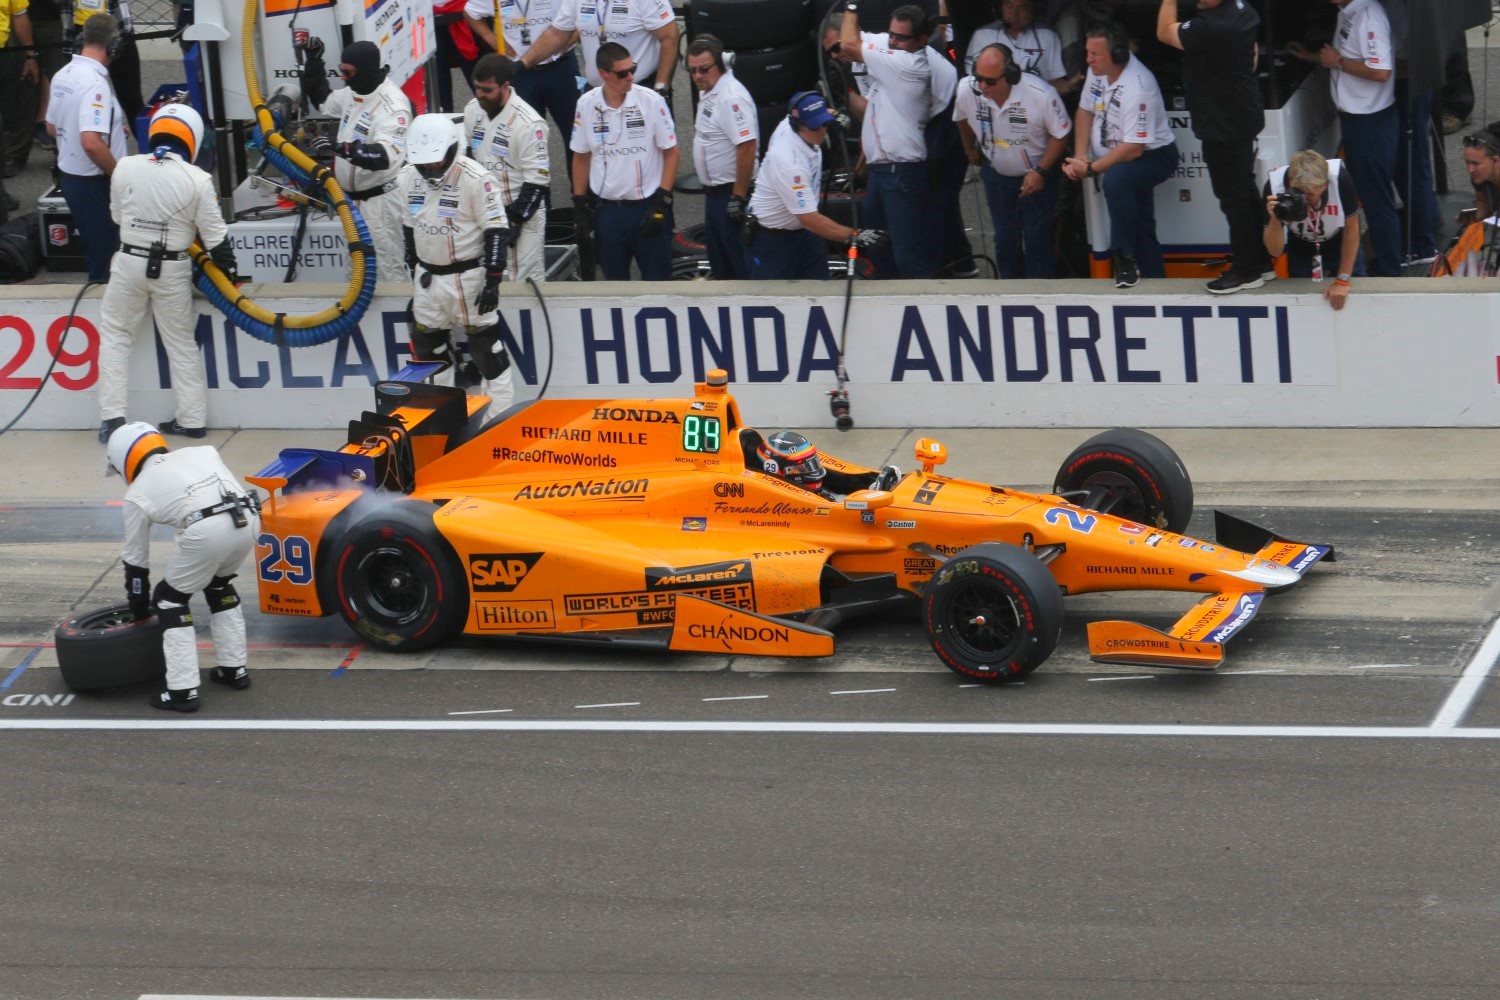 Alonso led and almost won the 2017 Indy 500 but then his Honda engine blew.  Can he win with Chevy in 2018?